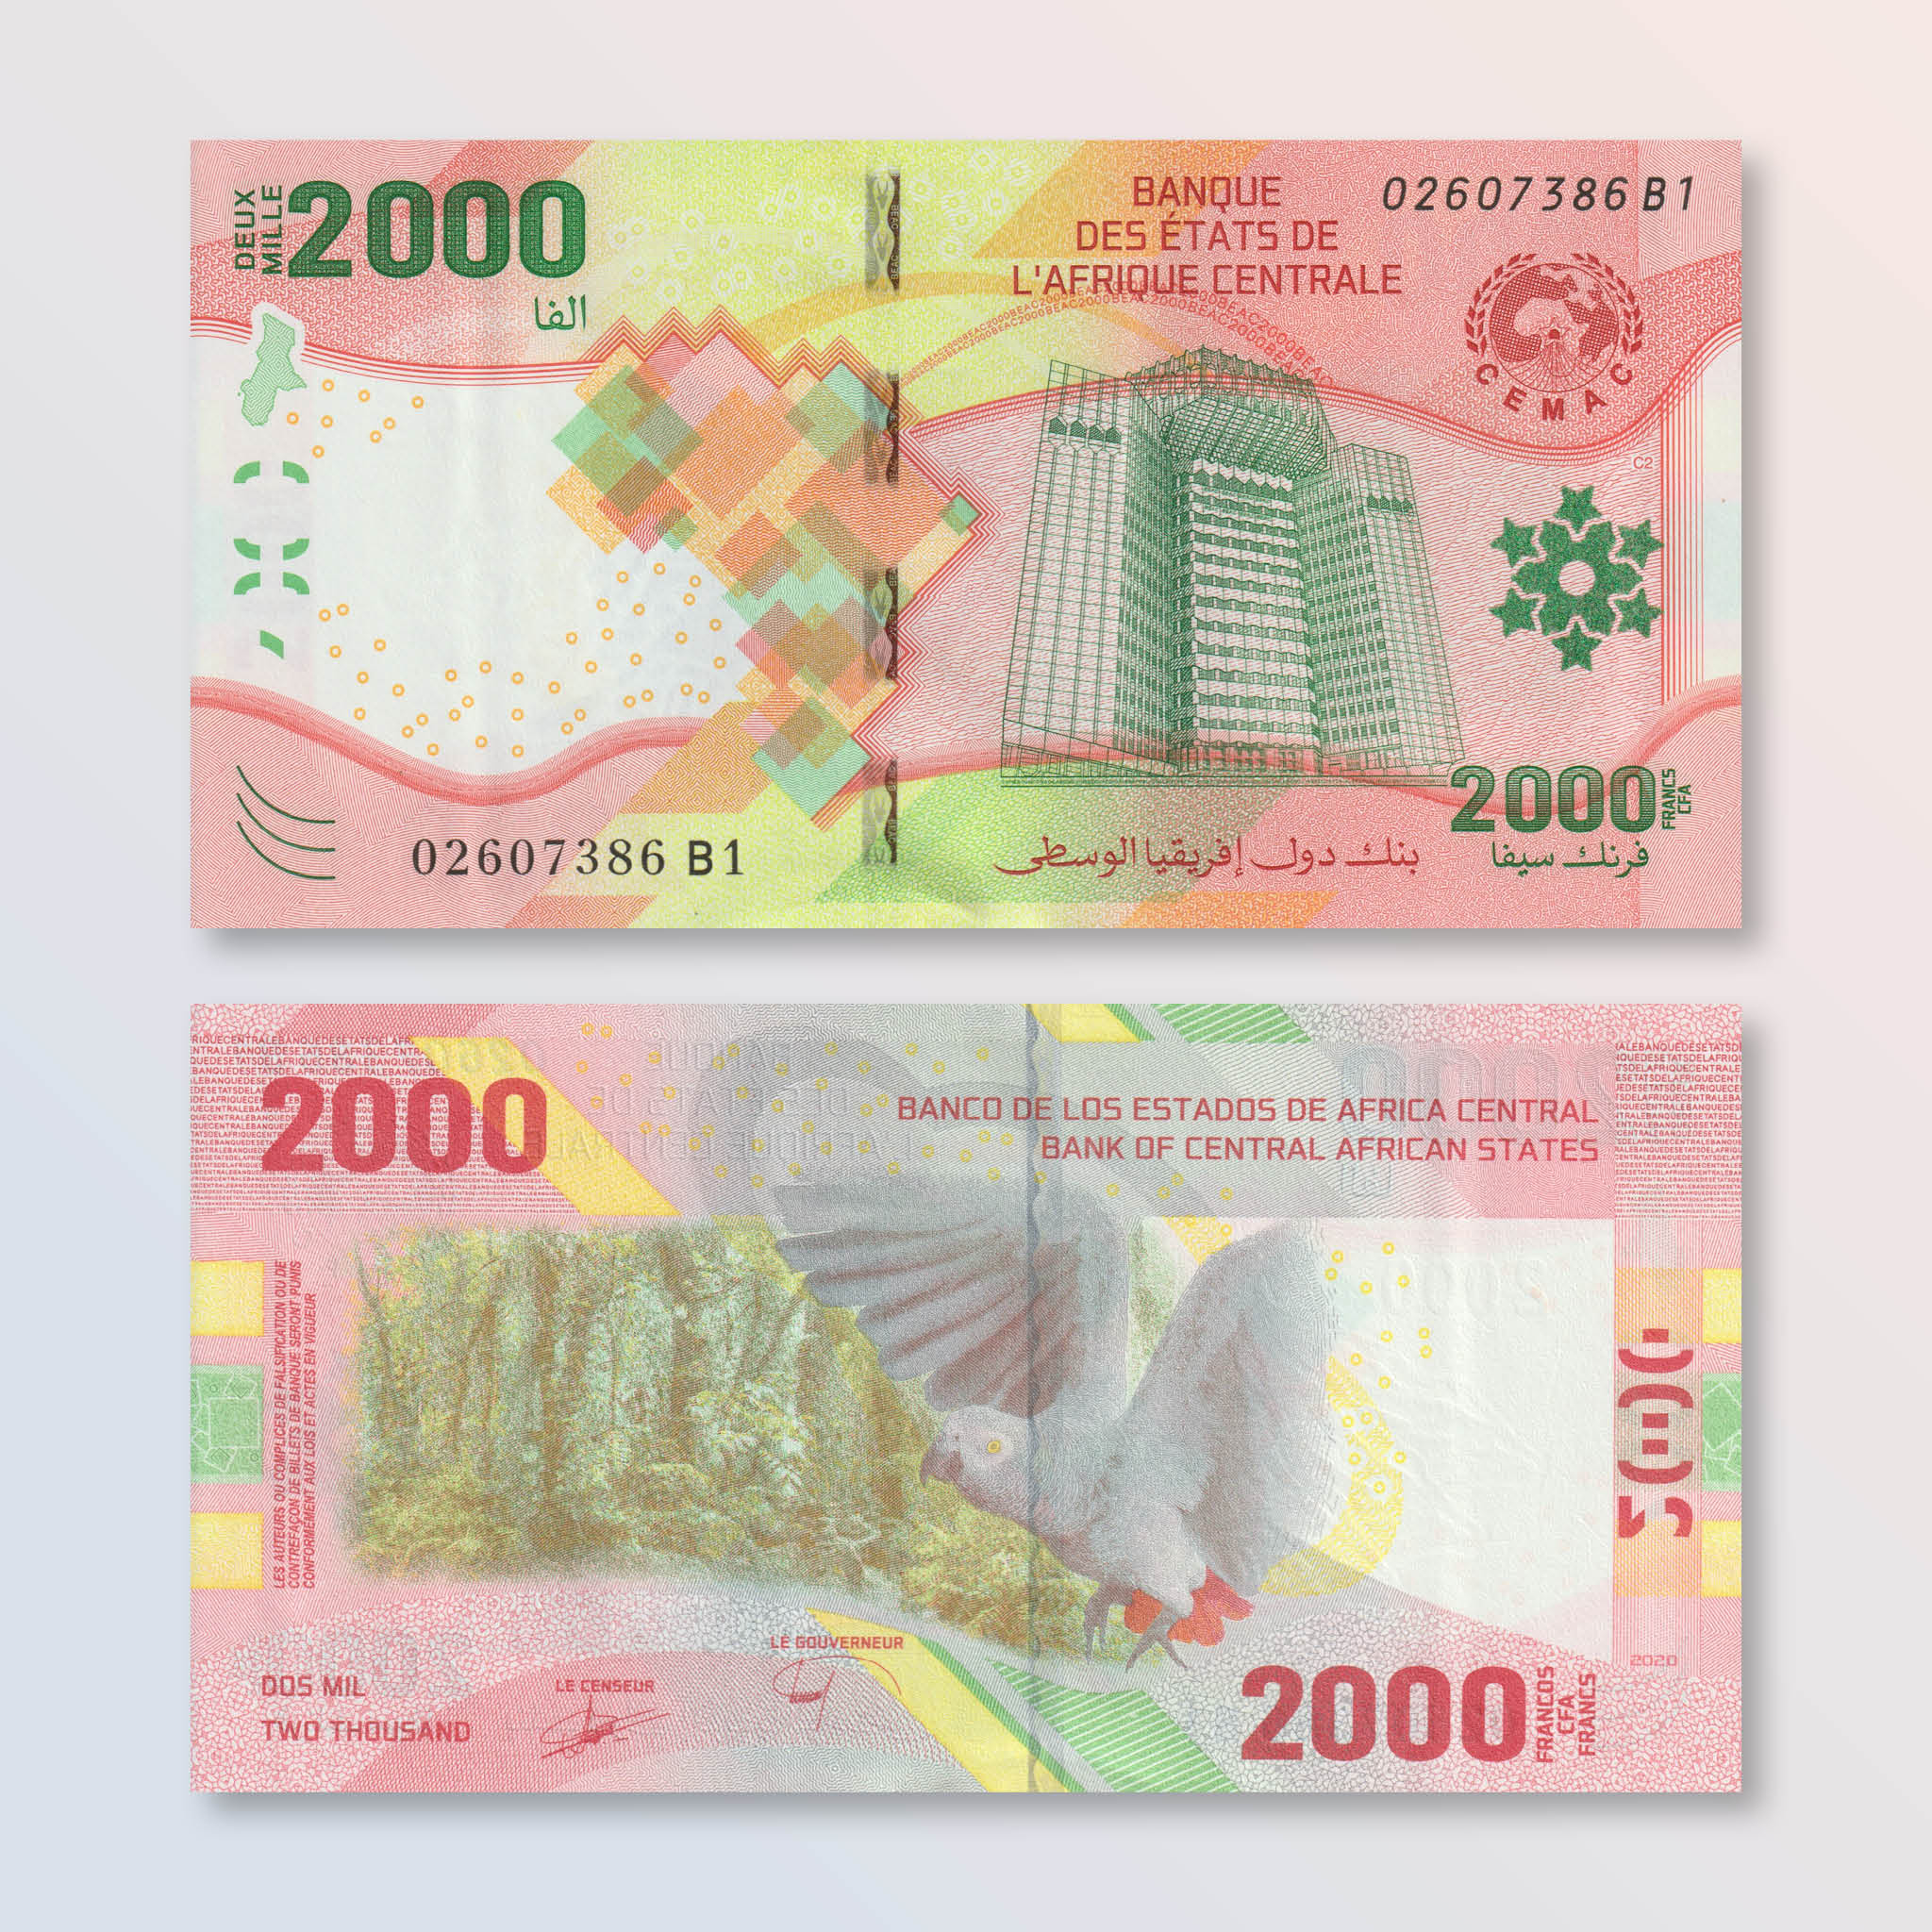 Central African States 2000 Francs, 2020 (2022), B113a, UNC - Robert's World Money - World Banknotes